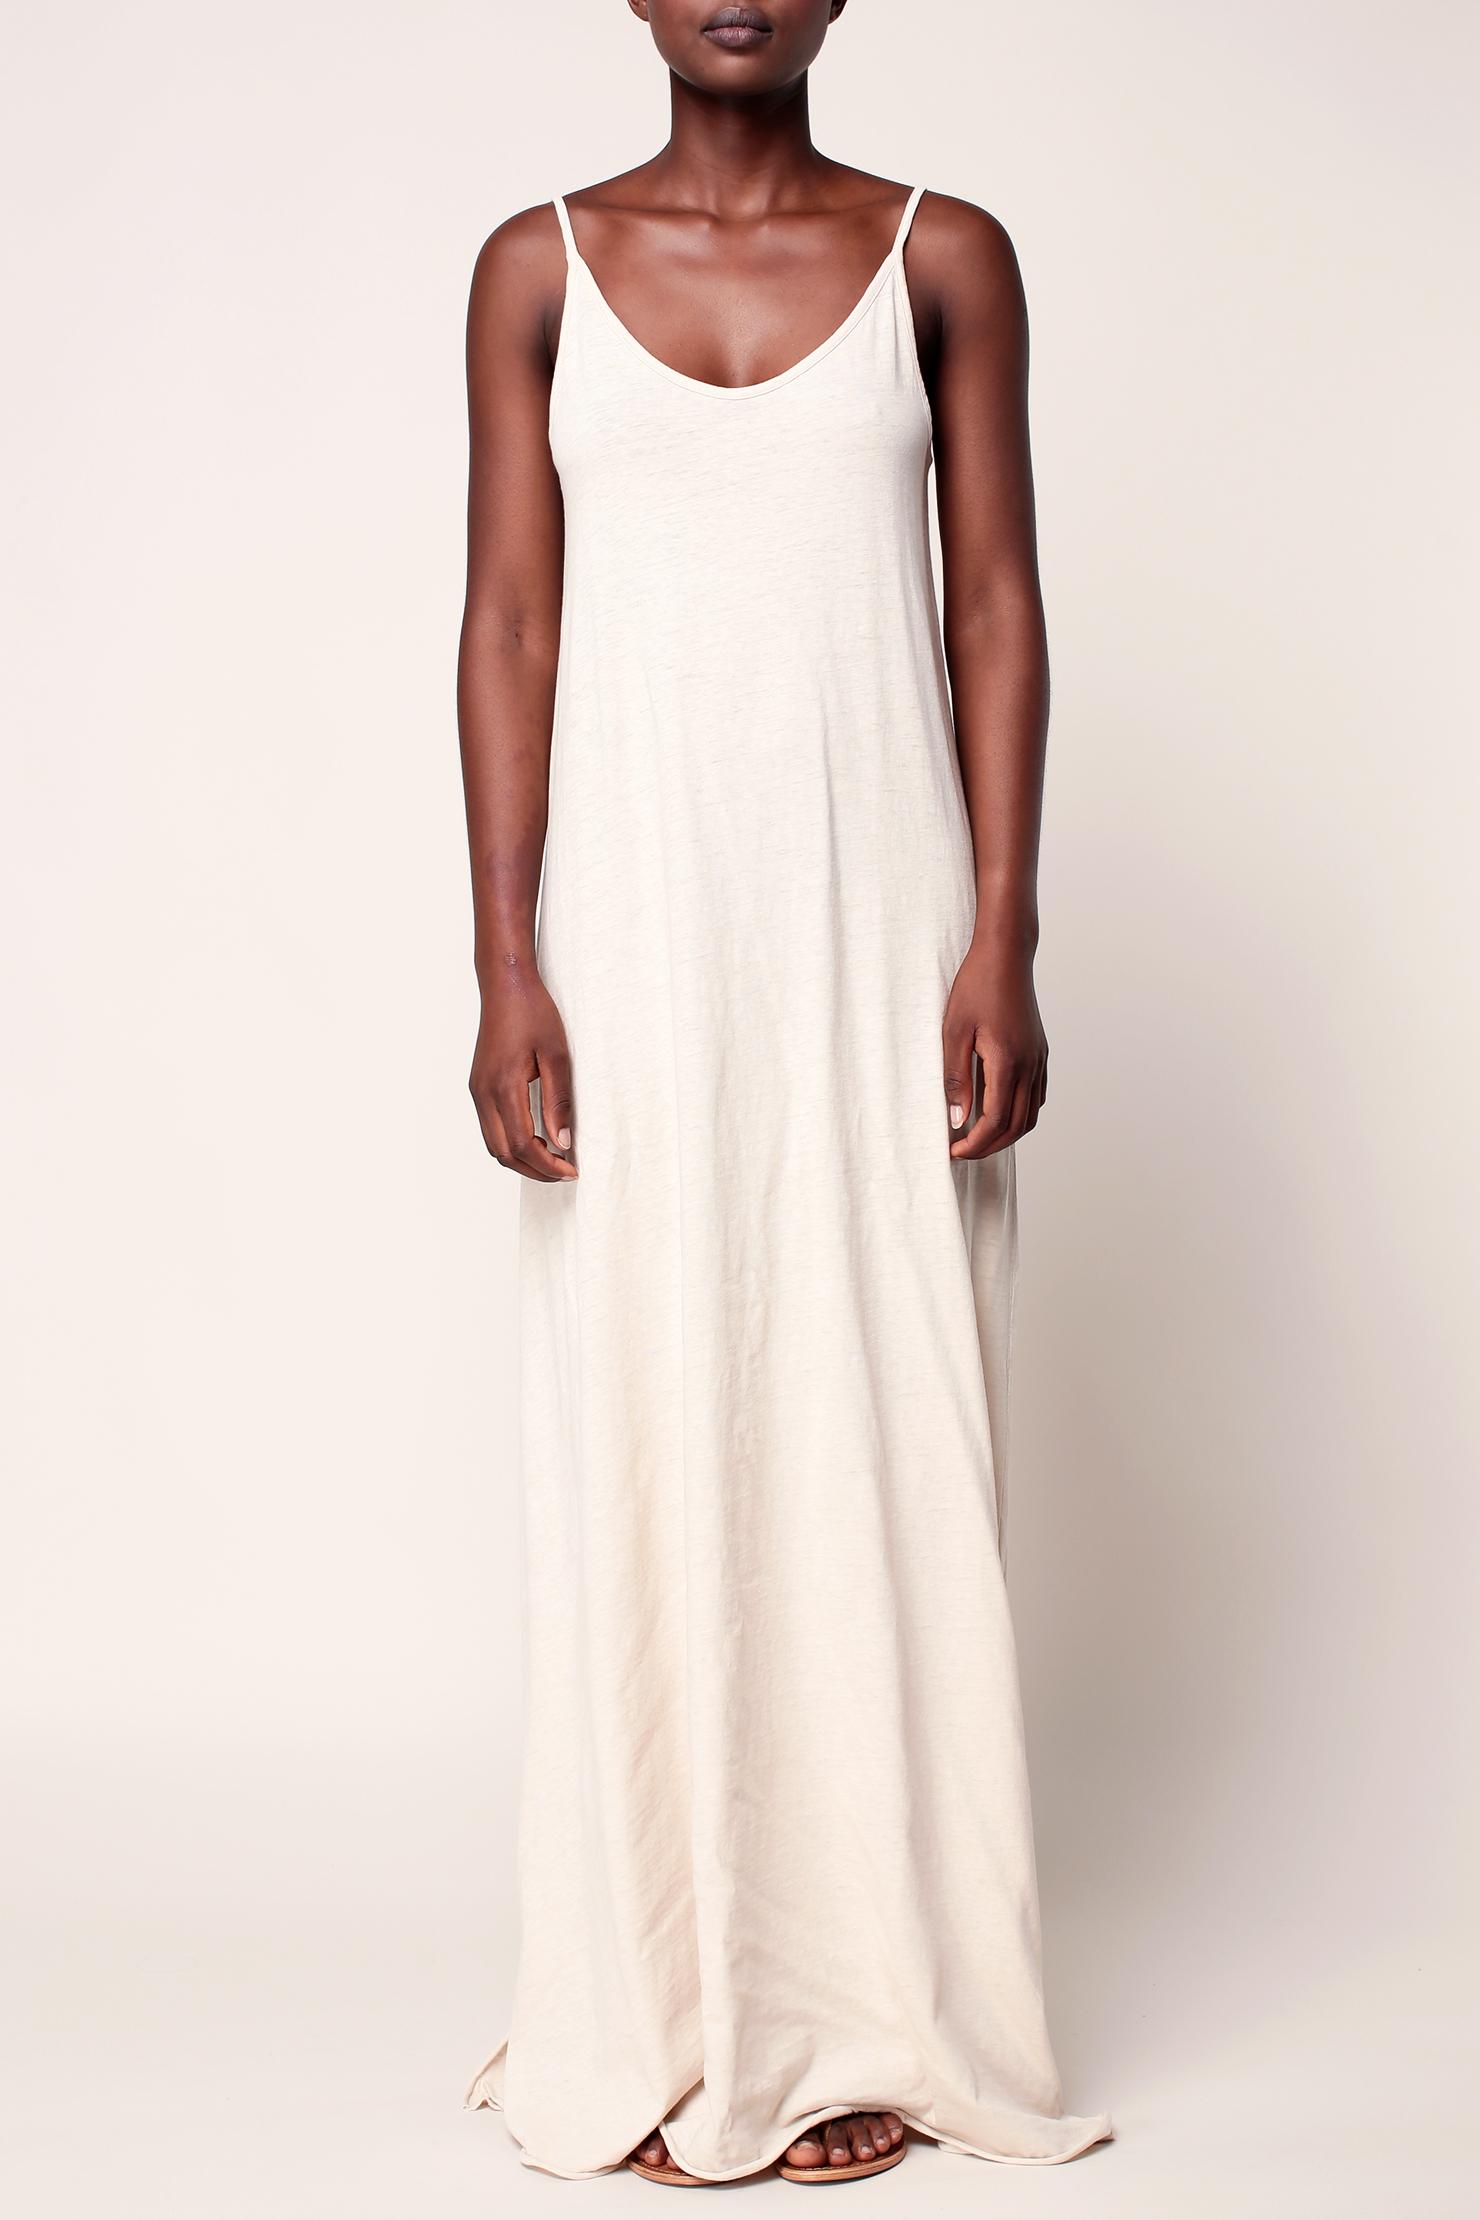 Lyst - American Vintage Maxi Dress in White